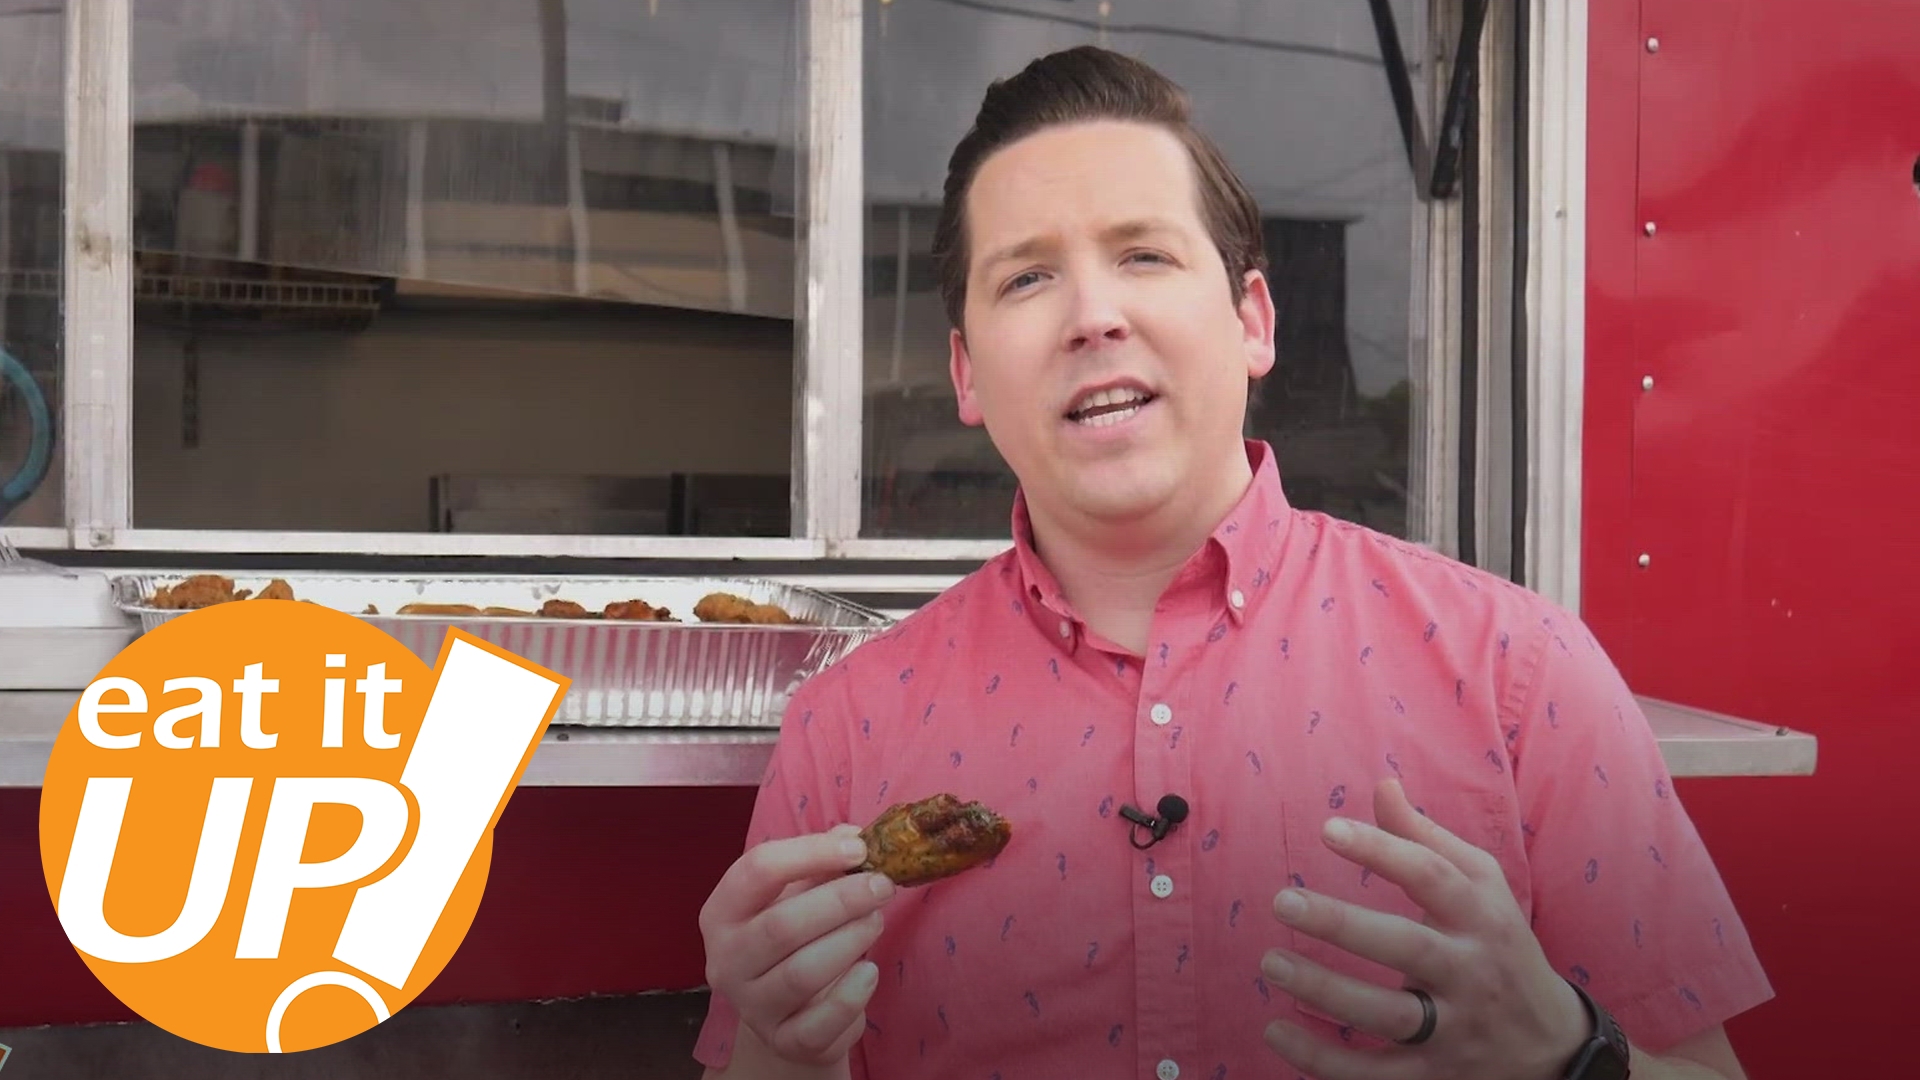 On this week's Eat It Up, Hayden Balgavy visits S & K Wings, a food truck based in North Little Rock that's all about spreading joy and serving some good food.